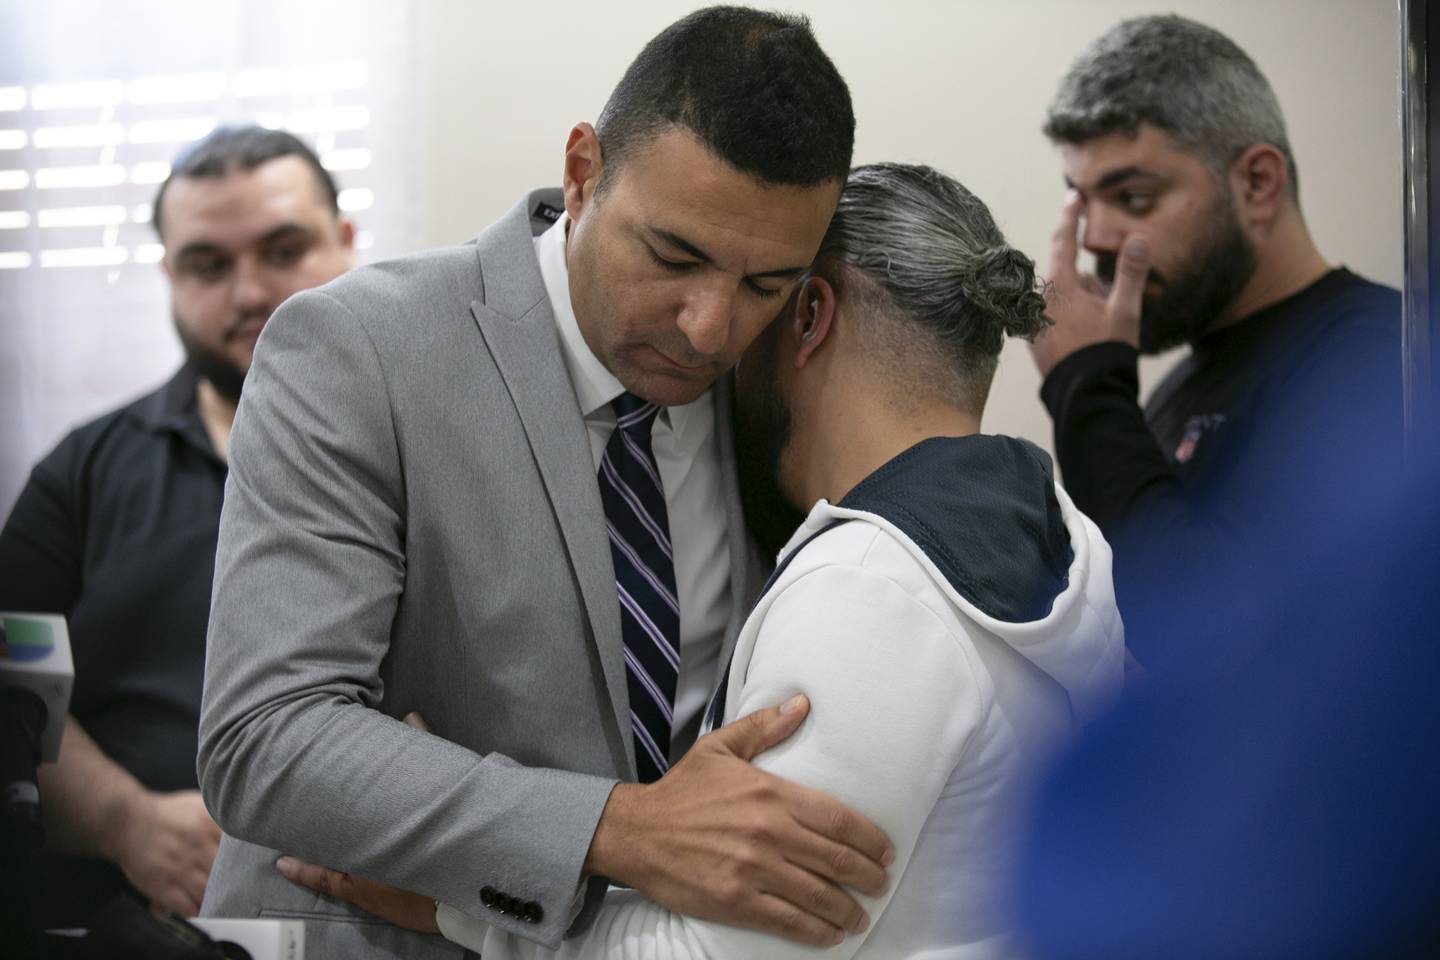 Ahmed Rehab, left, executive director of the Chicago chapter of the Council on American-Islamic Relations,  embraces Odey Al-Fayoume, father of Wadea Al-Fayoume, 6, at a news conference at the Muslim Community Center on Chicago's Northwest Side, Sunday, Oct. 15, 2023. Authorities say a 71-year-old Illinois man has been charged with a hate crime, accused of fatally stabbing a 6-year-old boy and seriously wounding a 32-year-old woman, in Plainfield Township, because of their Islamic faith and the Israel-Hamas war. The Council on American-Islamic Relations identified the victims as Wadea Al-Fayoume and his mother.